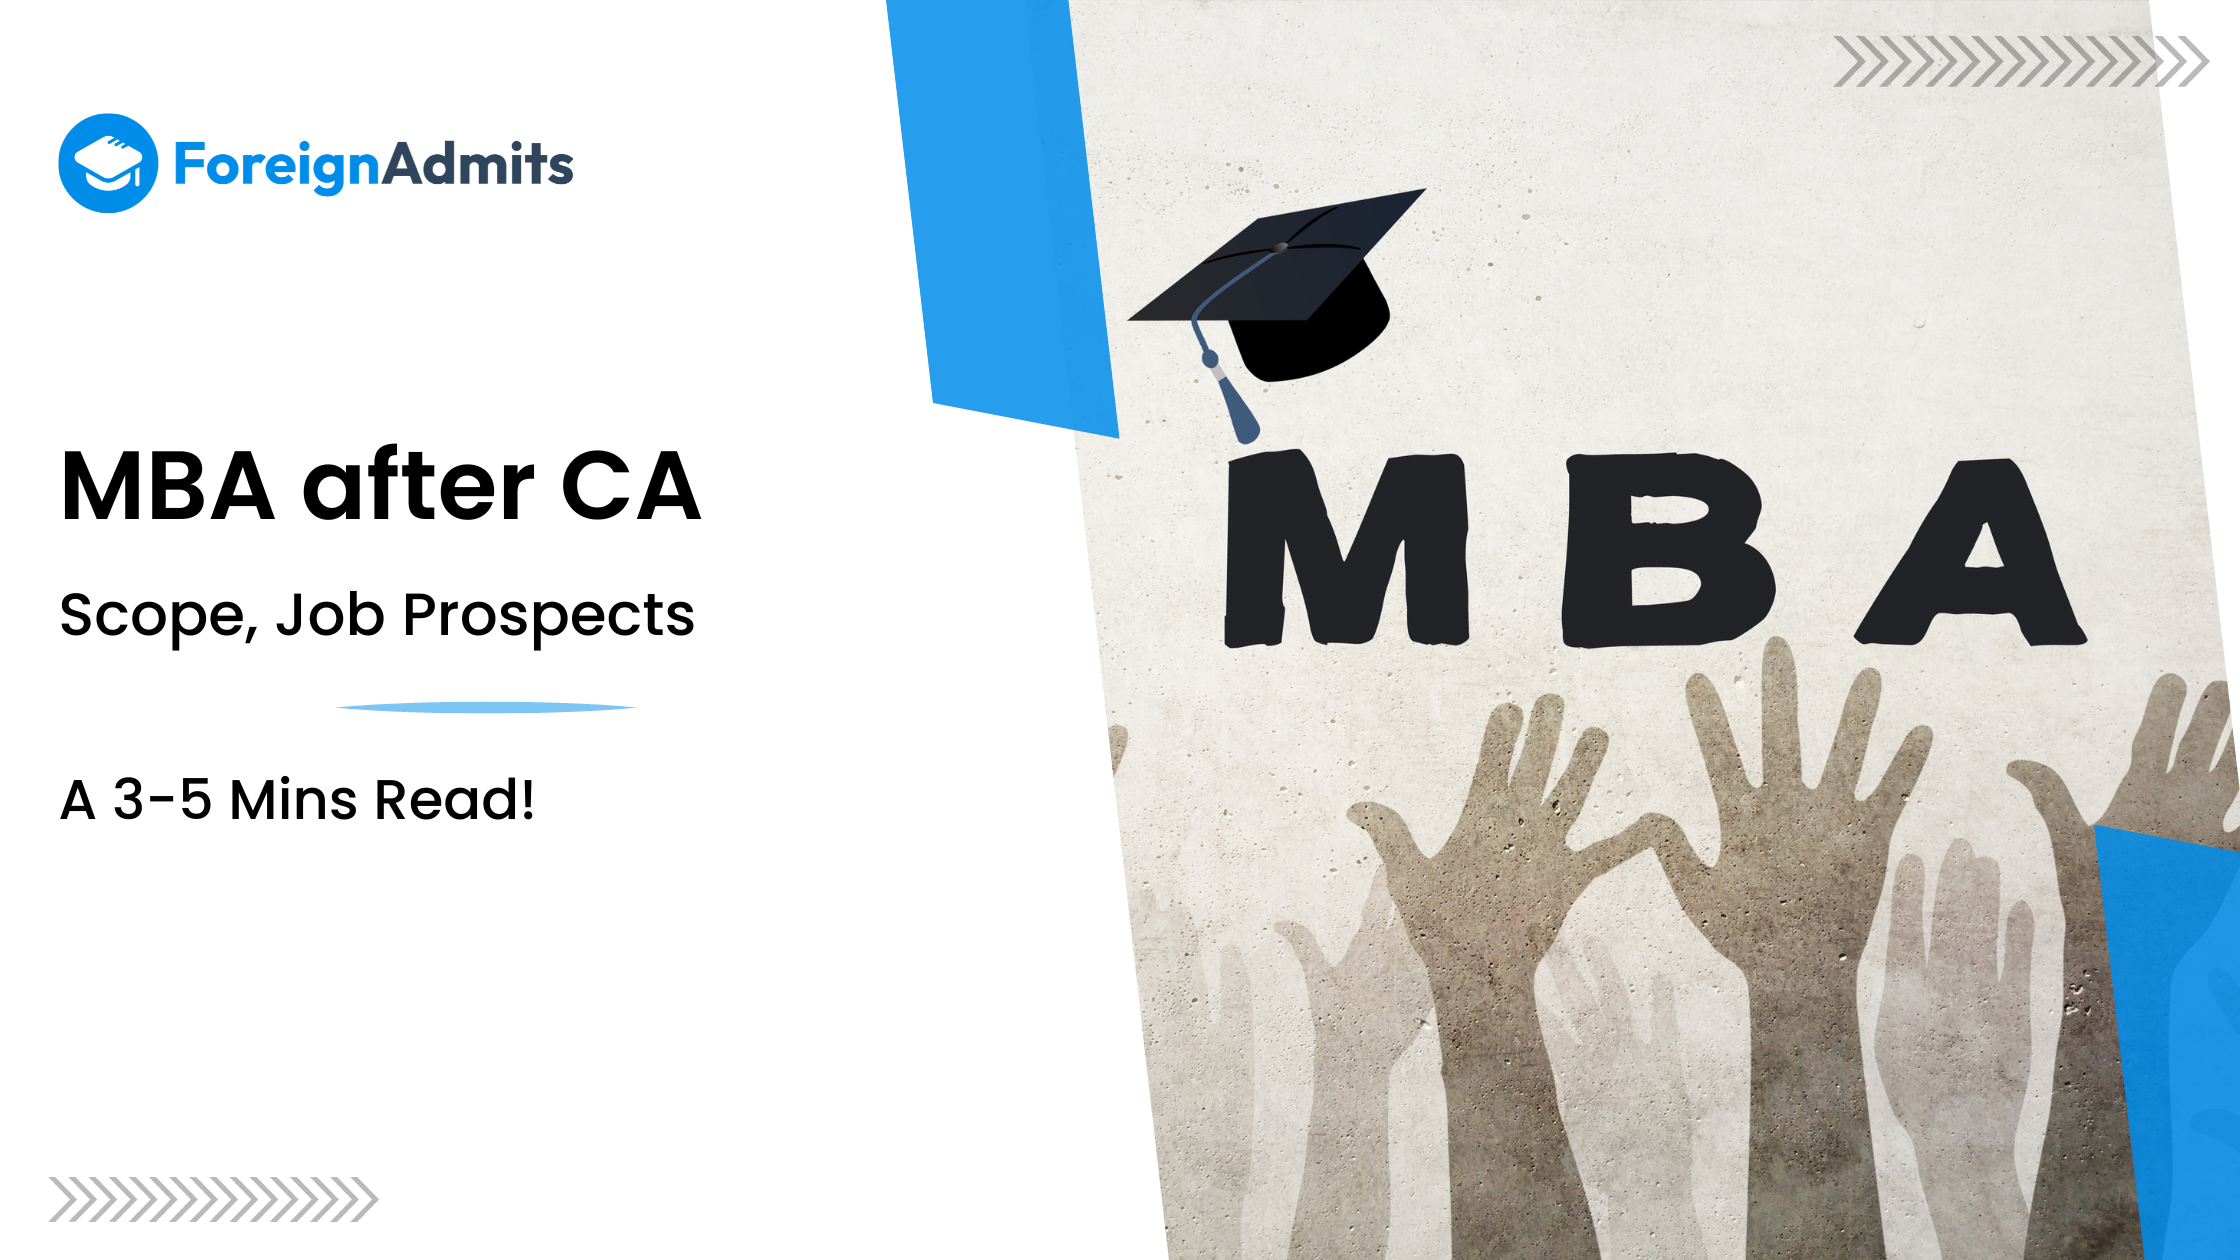 MBA after CA – Scope, Job Prospects, and More